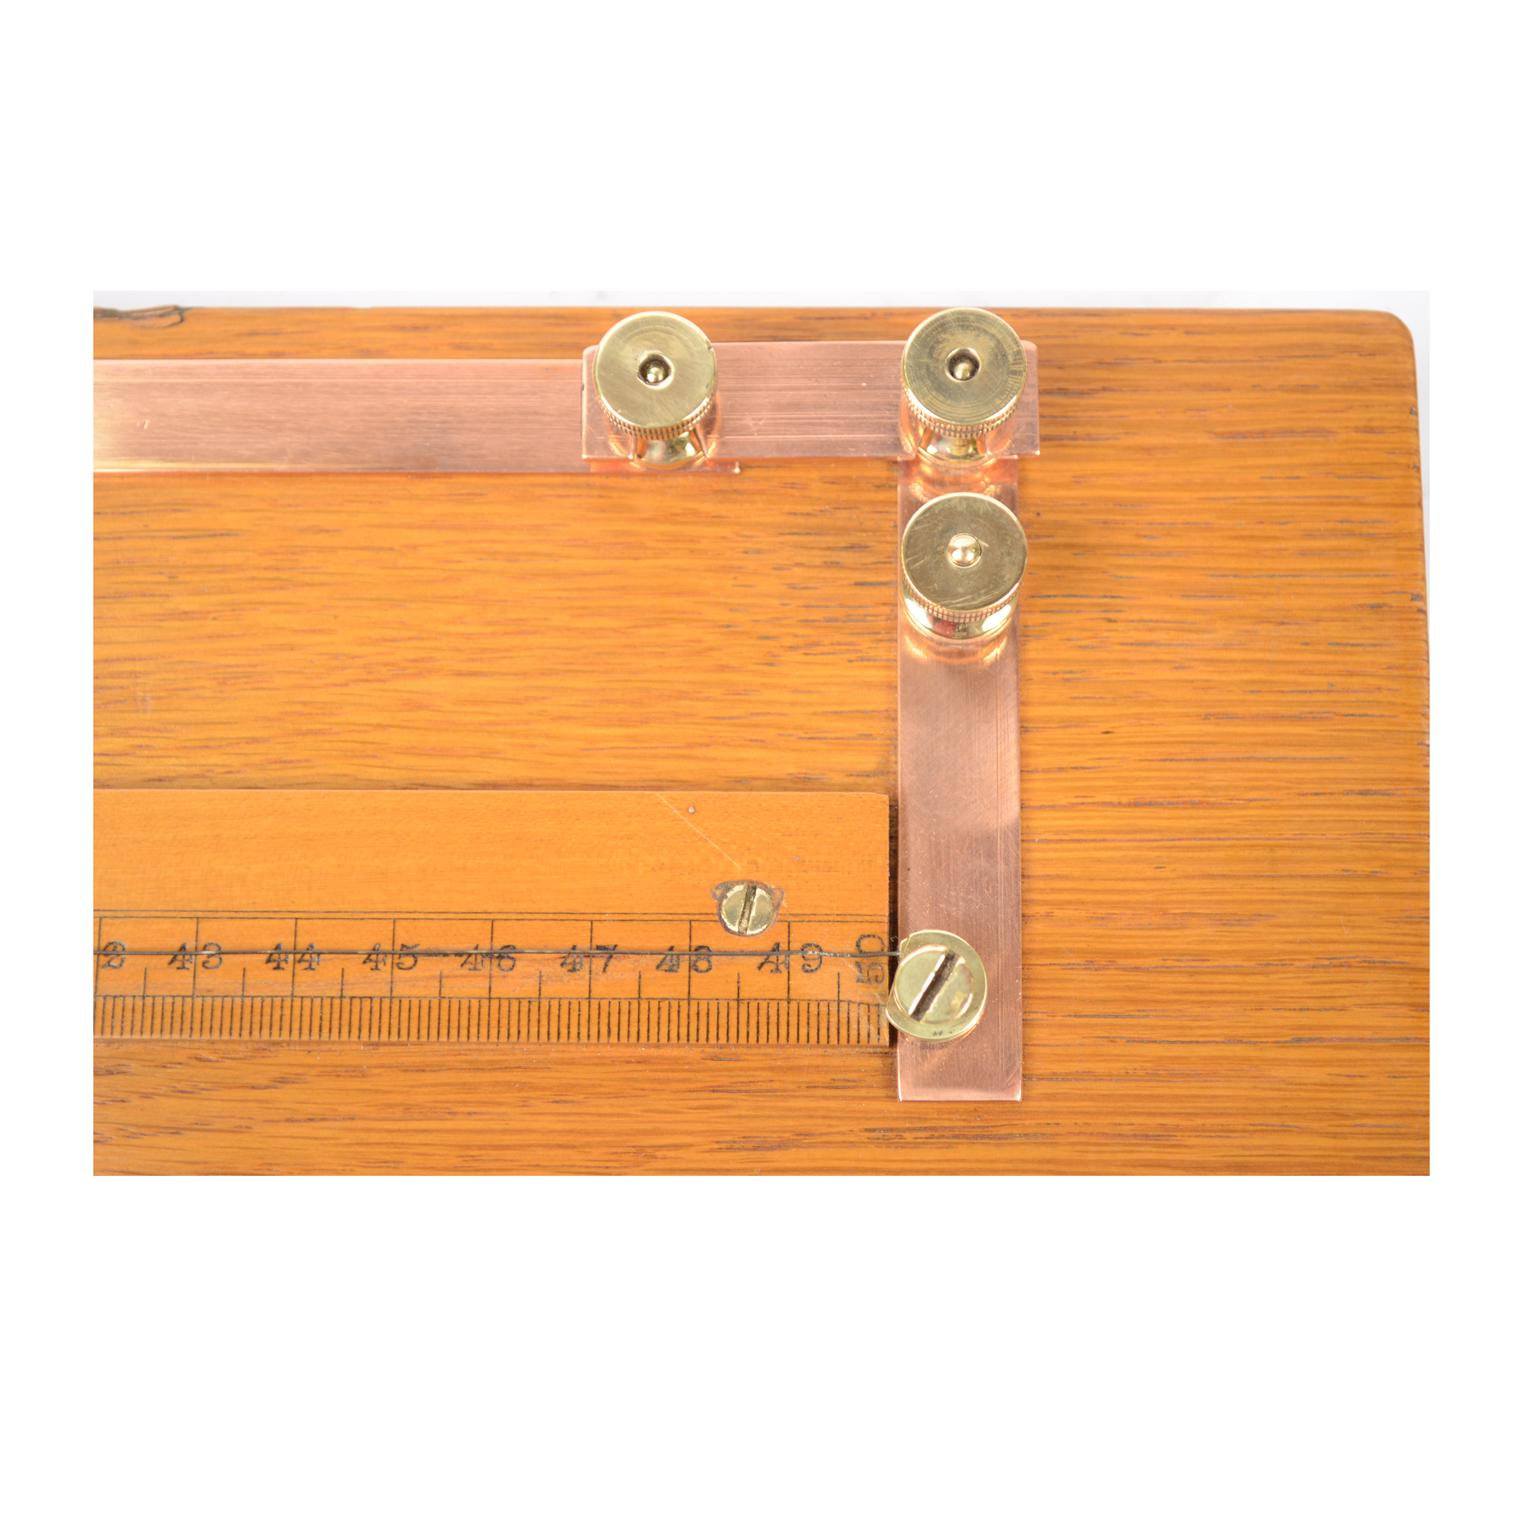 Resistance Measuring Device of the Second Half of the 19th Century 10